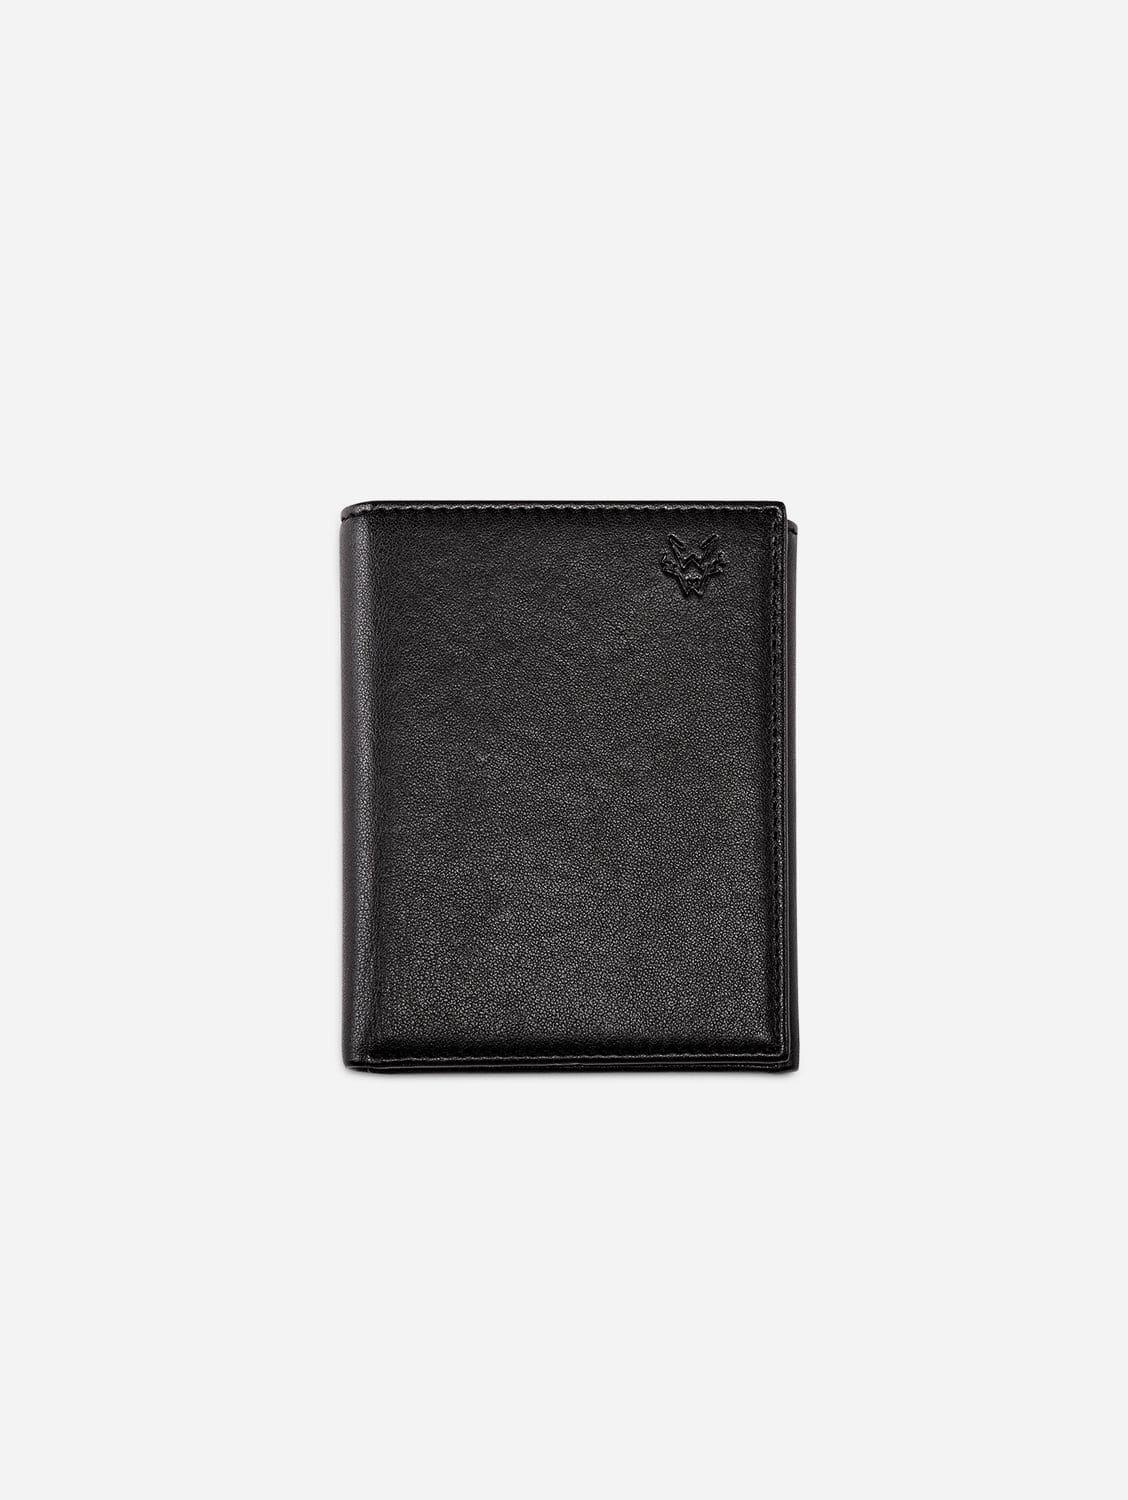 Trifold Vegan Leather RFID Protective Wallet for Key Belt Chain | Blac ...